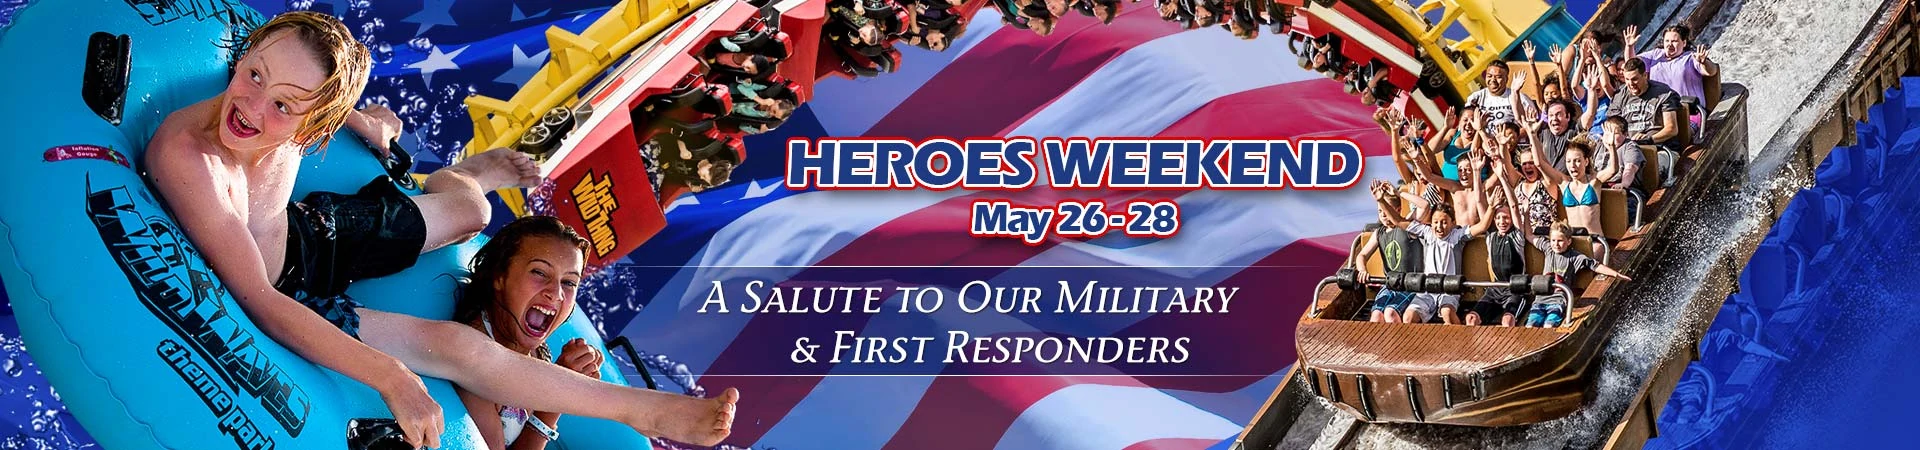 Wild Waves - Free Admission for Military & First Responders